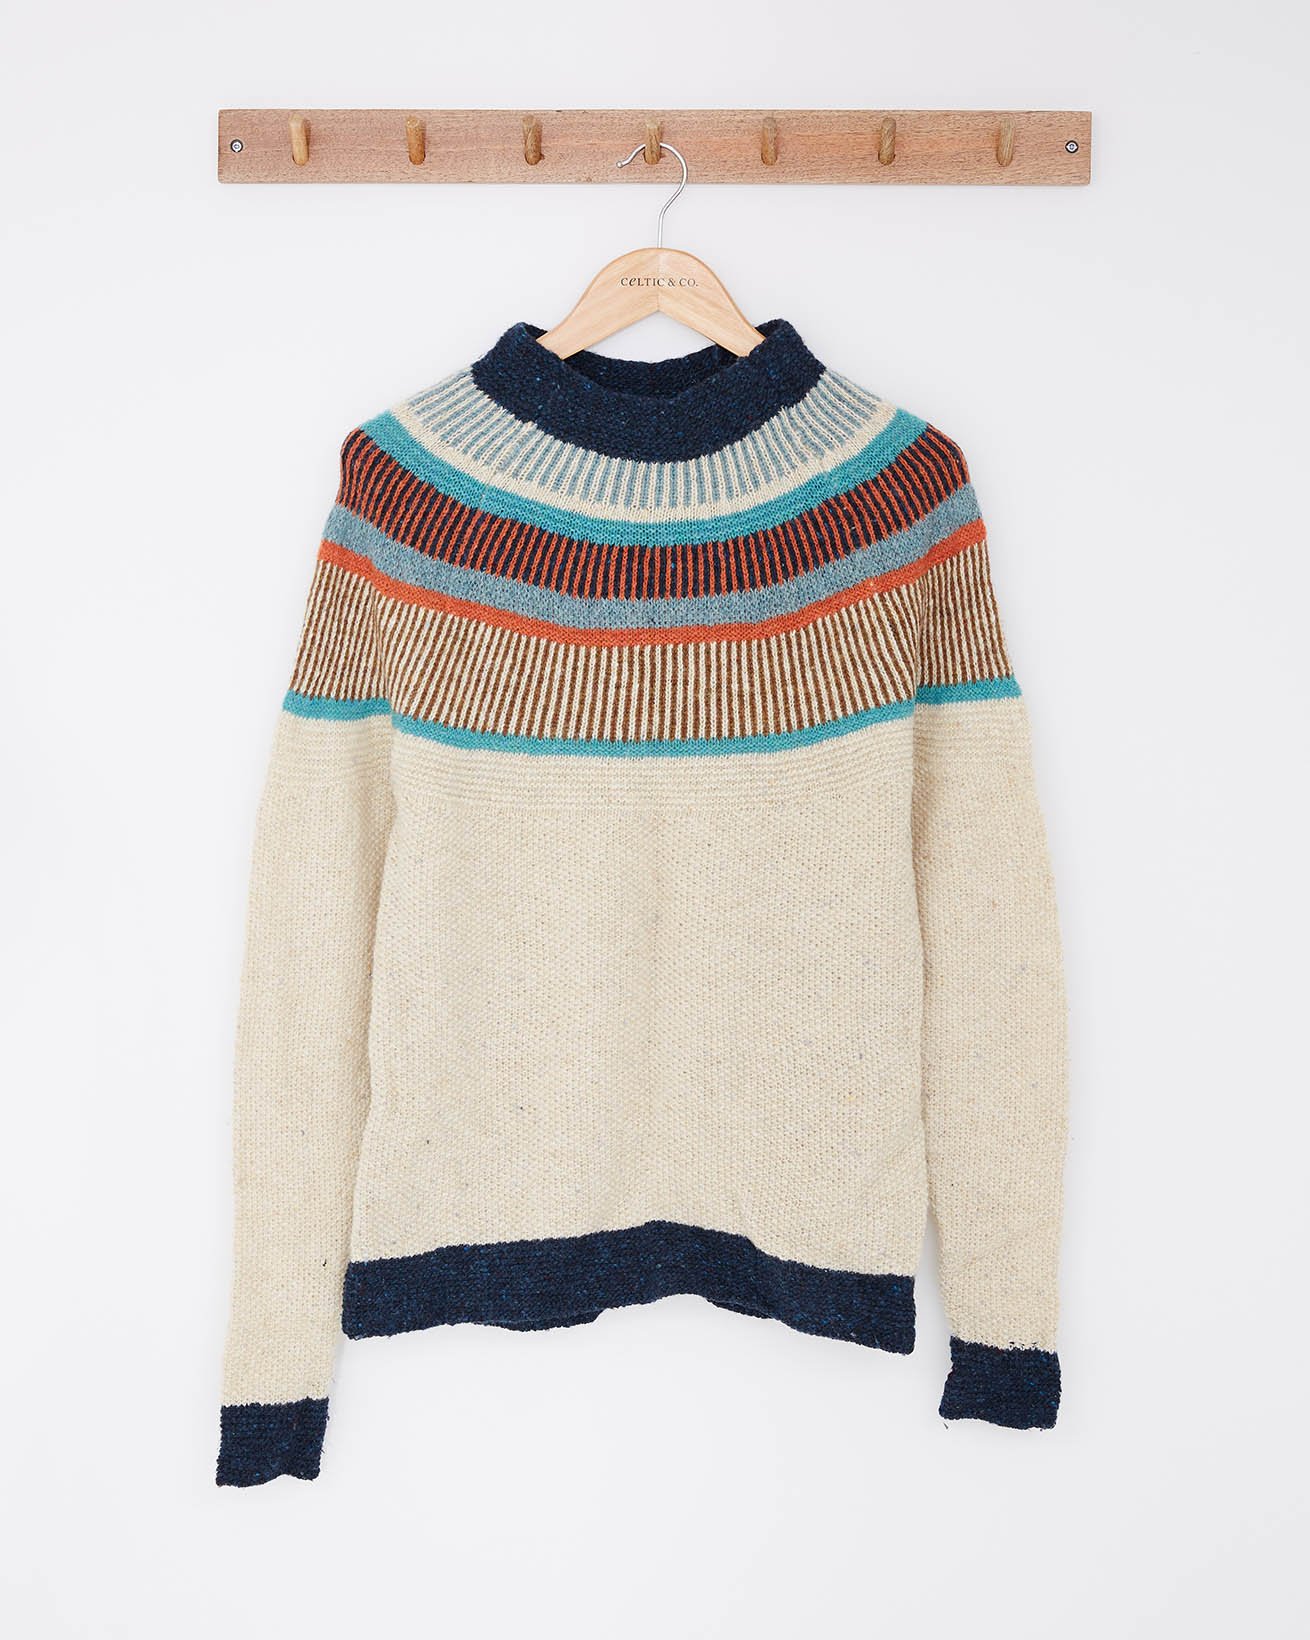 2815 - statement donegal jumper  oatmeal  xs front.jpg